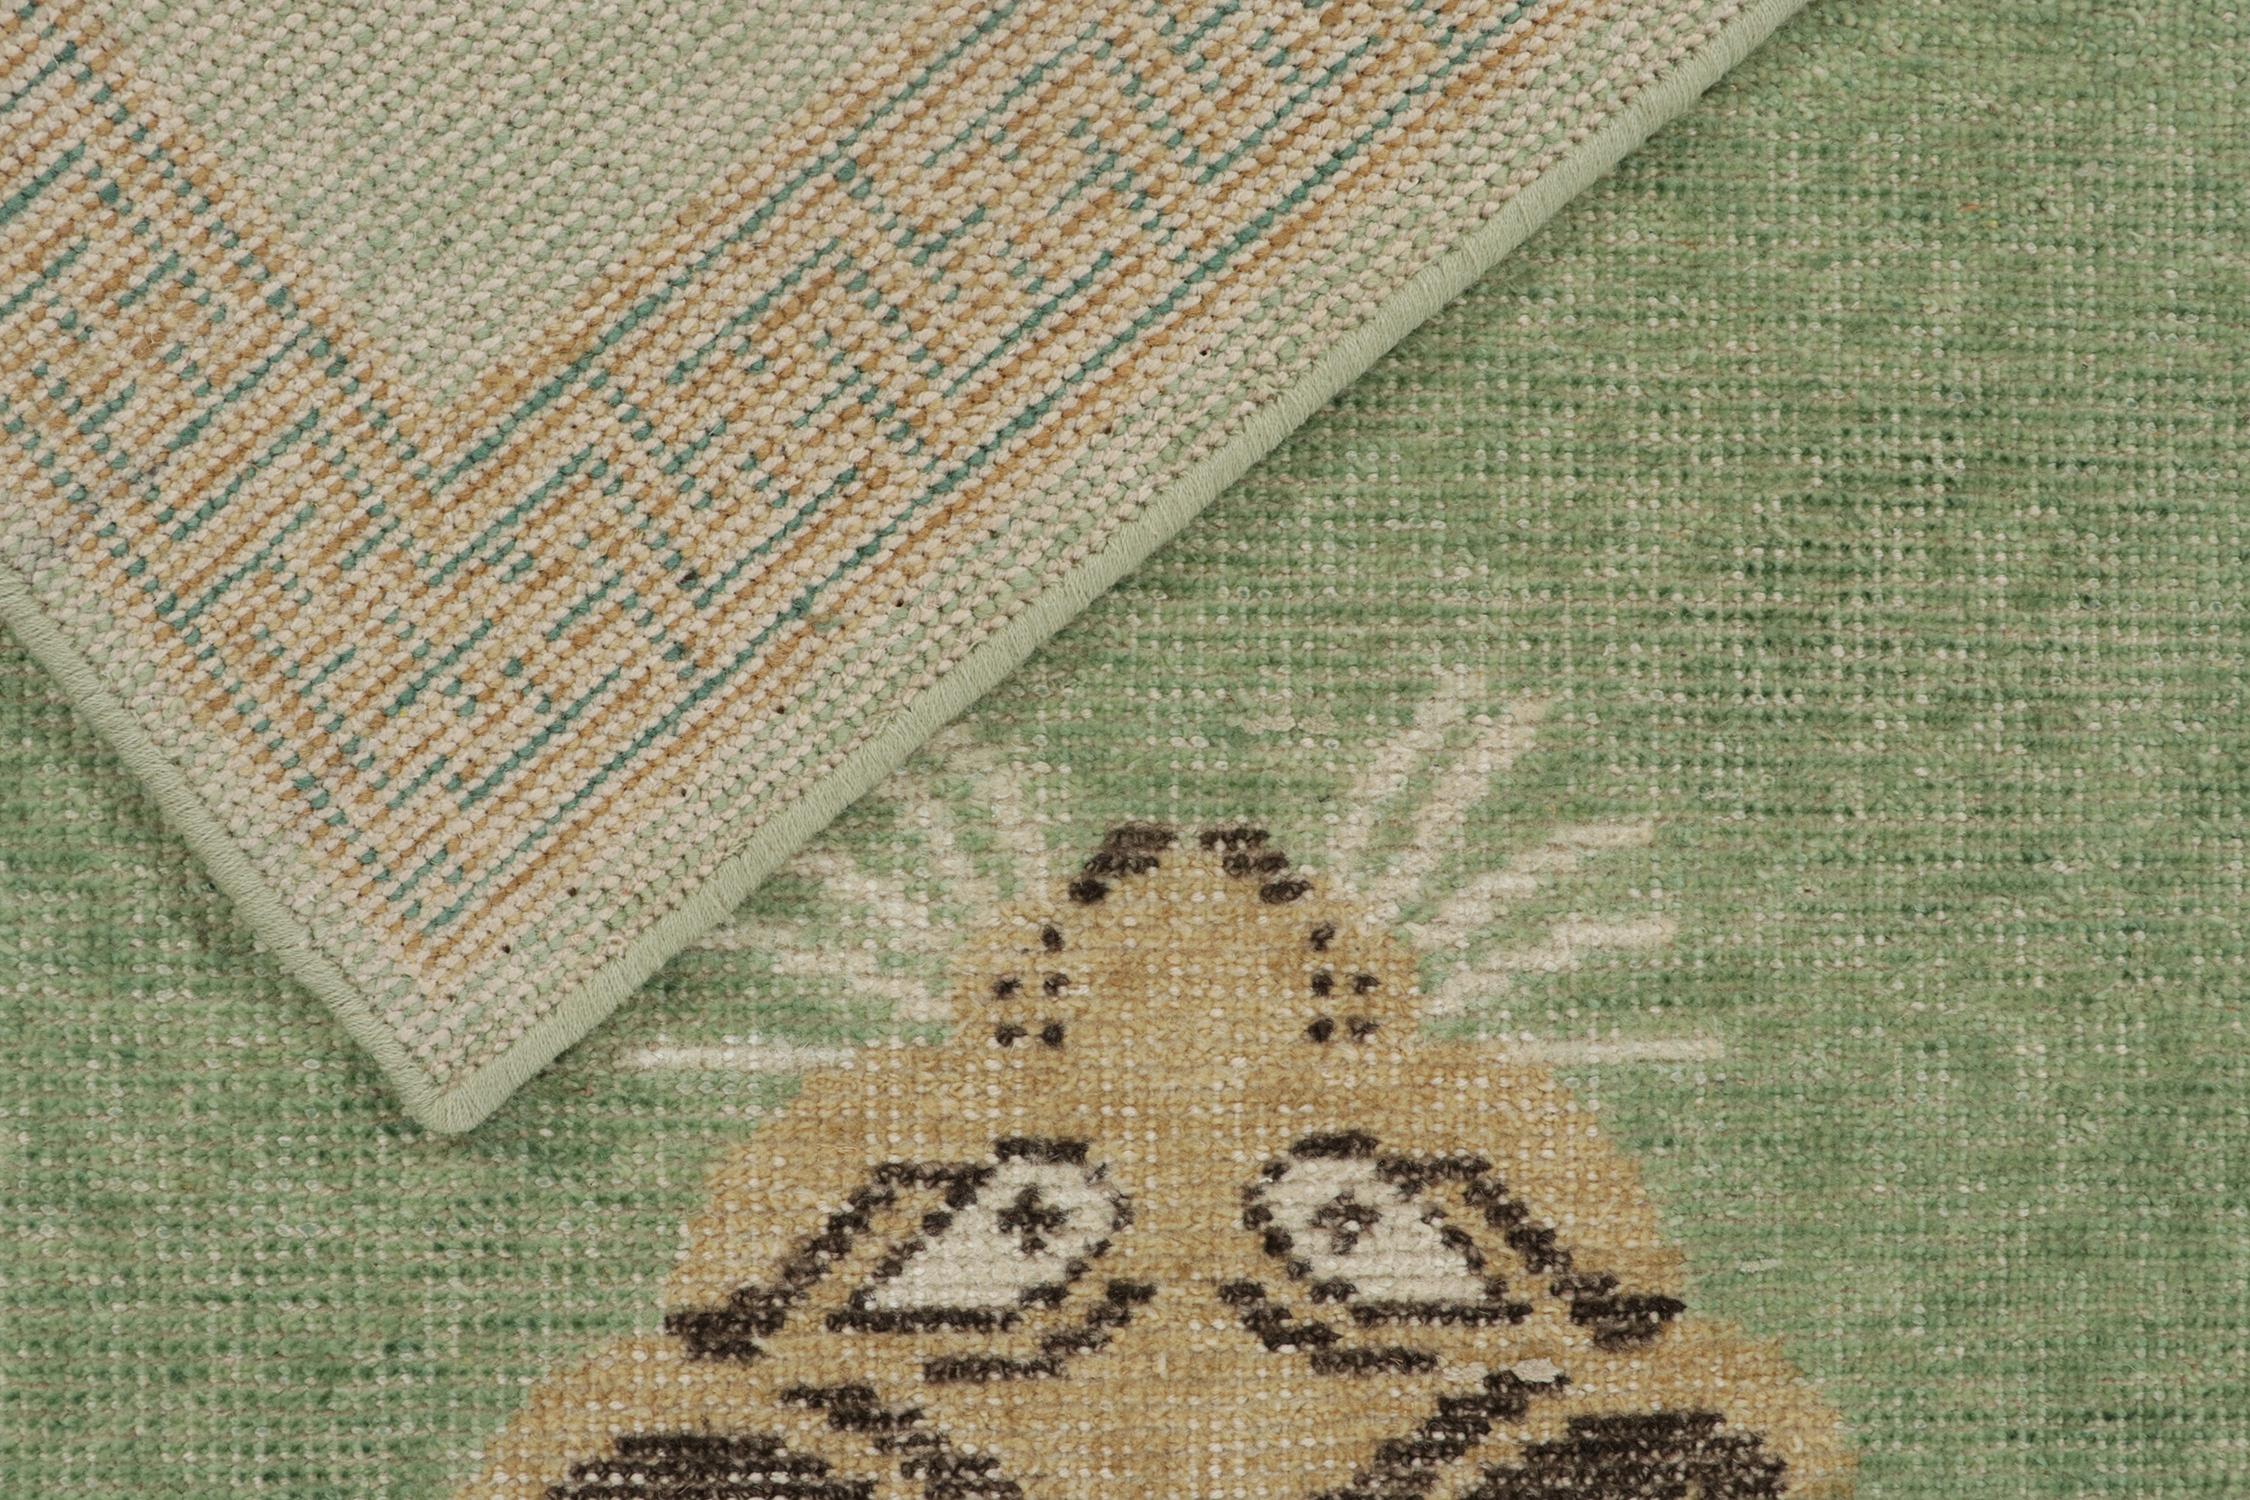 Wool Rug & Kilim’s Distressed Style Tiger Runner in Green, Beige & Black Pictorial For Sale